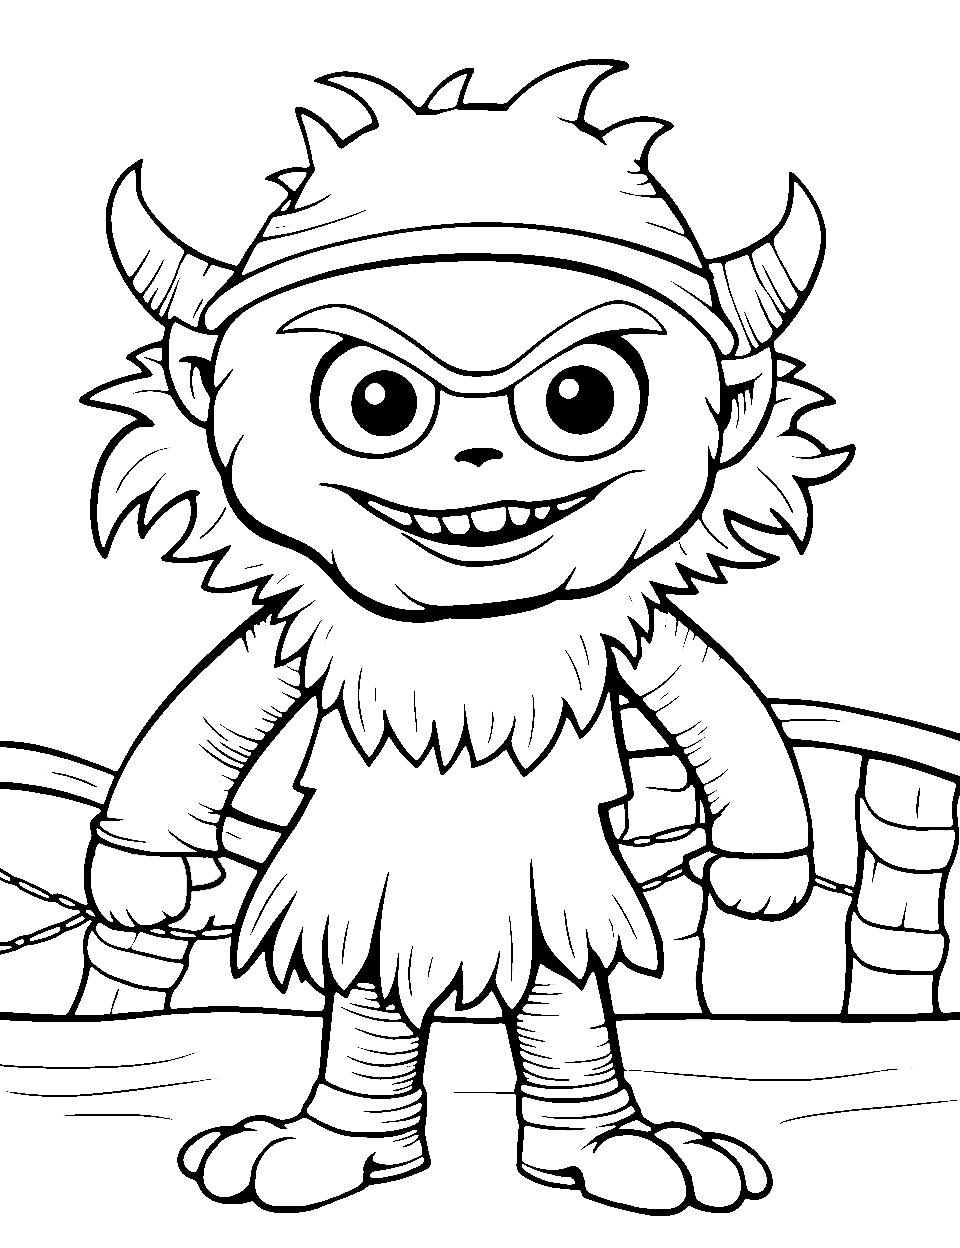 Monster on a Pirate Ship Coloring Page - A monster dressed as a pirate, standing on the deck of a pirate ship.